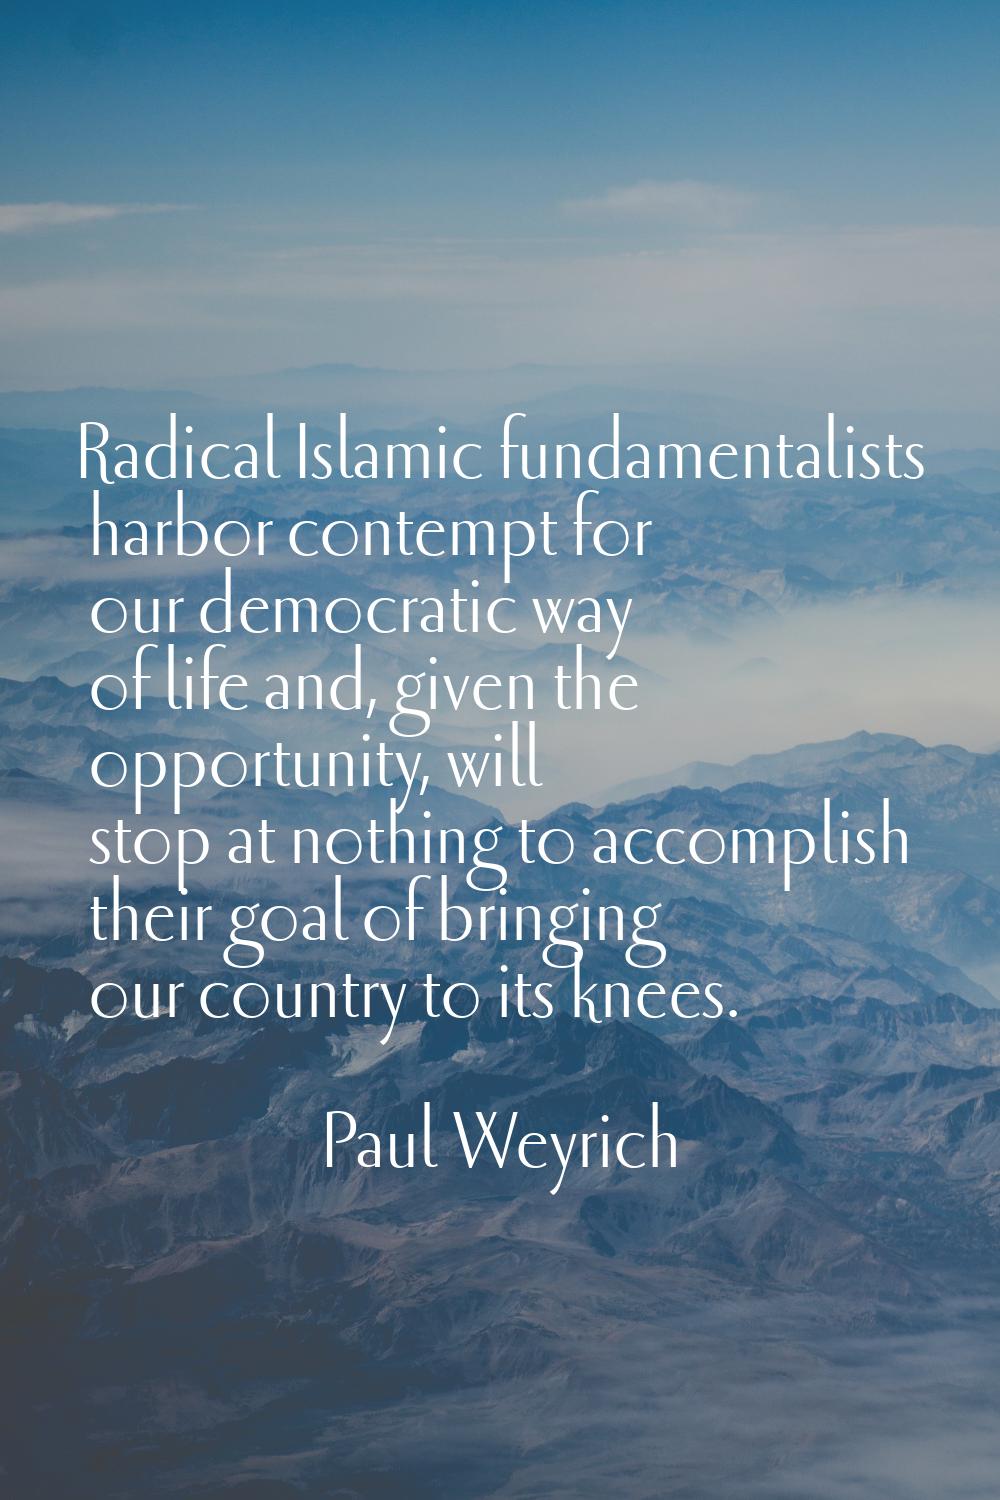 Radical Islamic fundamentalists harbor contempt for our democratic way of life and, given the oppor